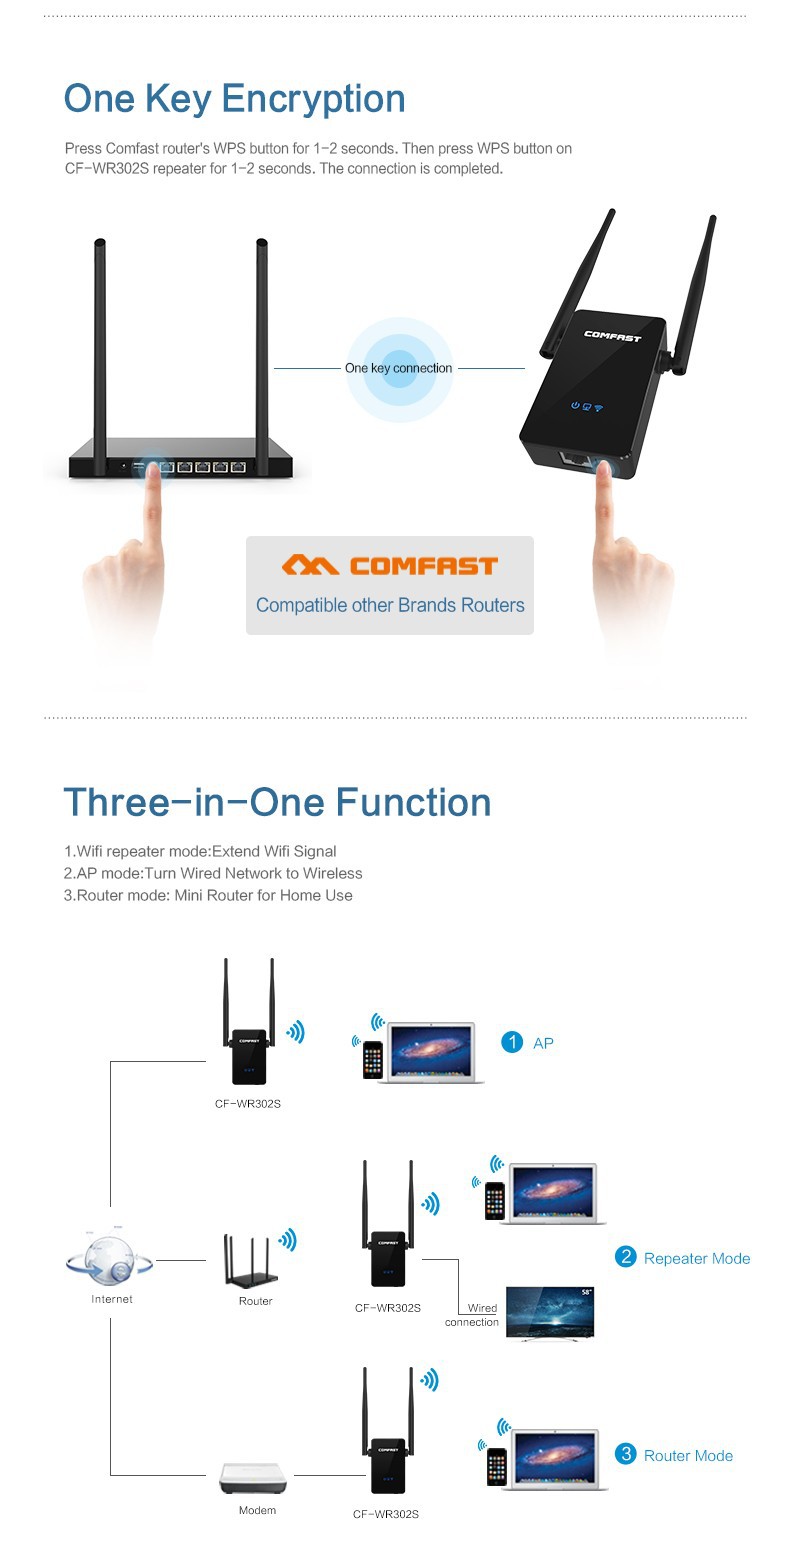 Up to 300Mbps Wifi Repeater dual 5dBi External Antennas 802.11N B G wireless Router Range Expander Signal Boosters